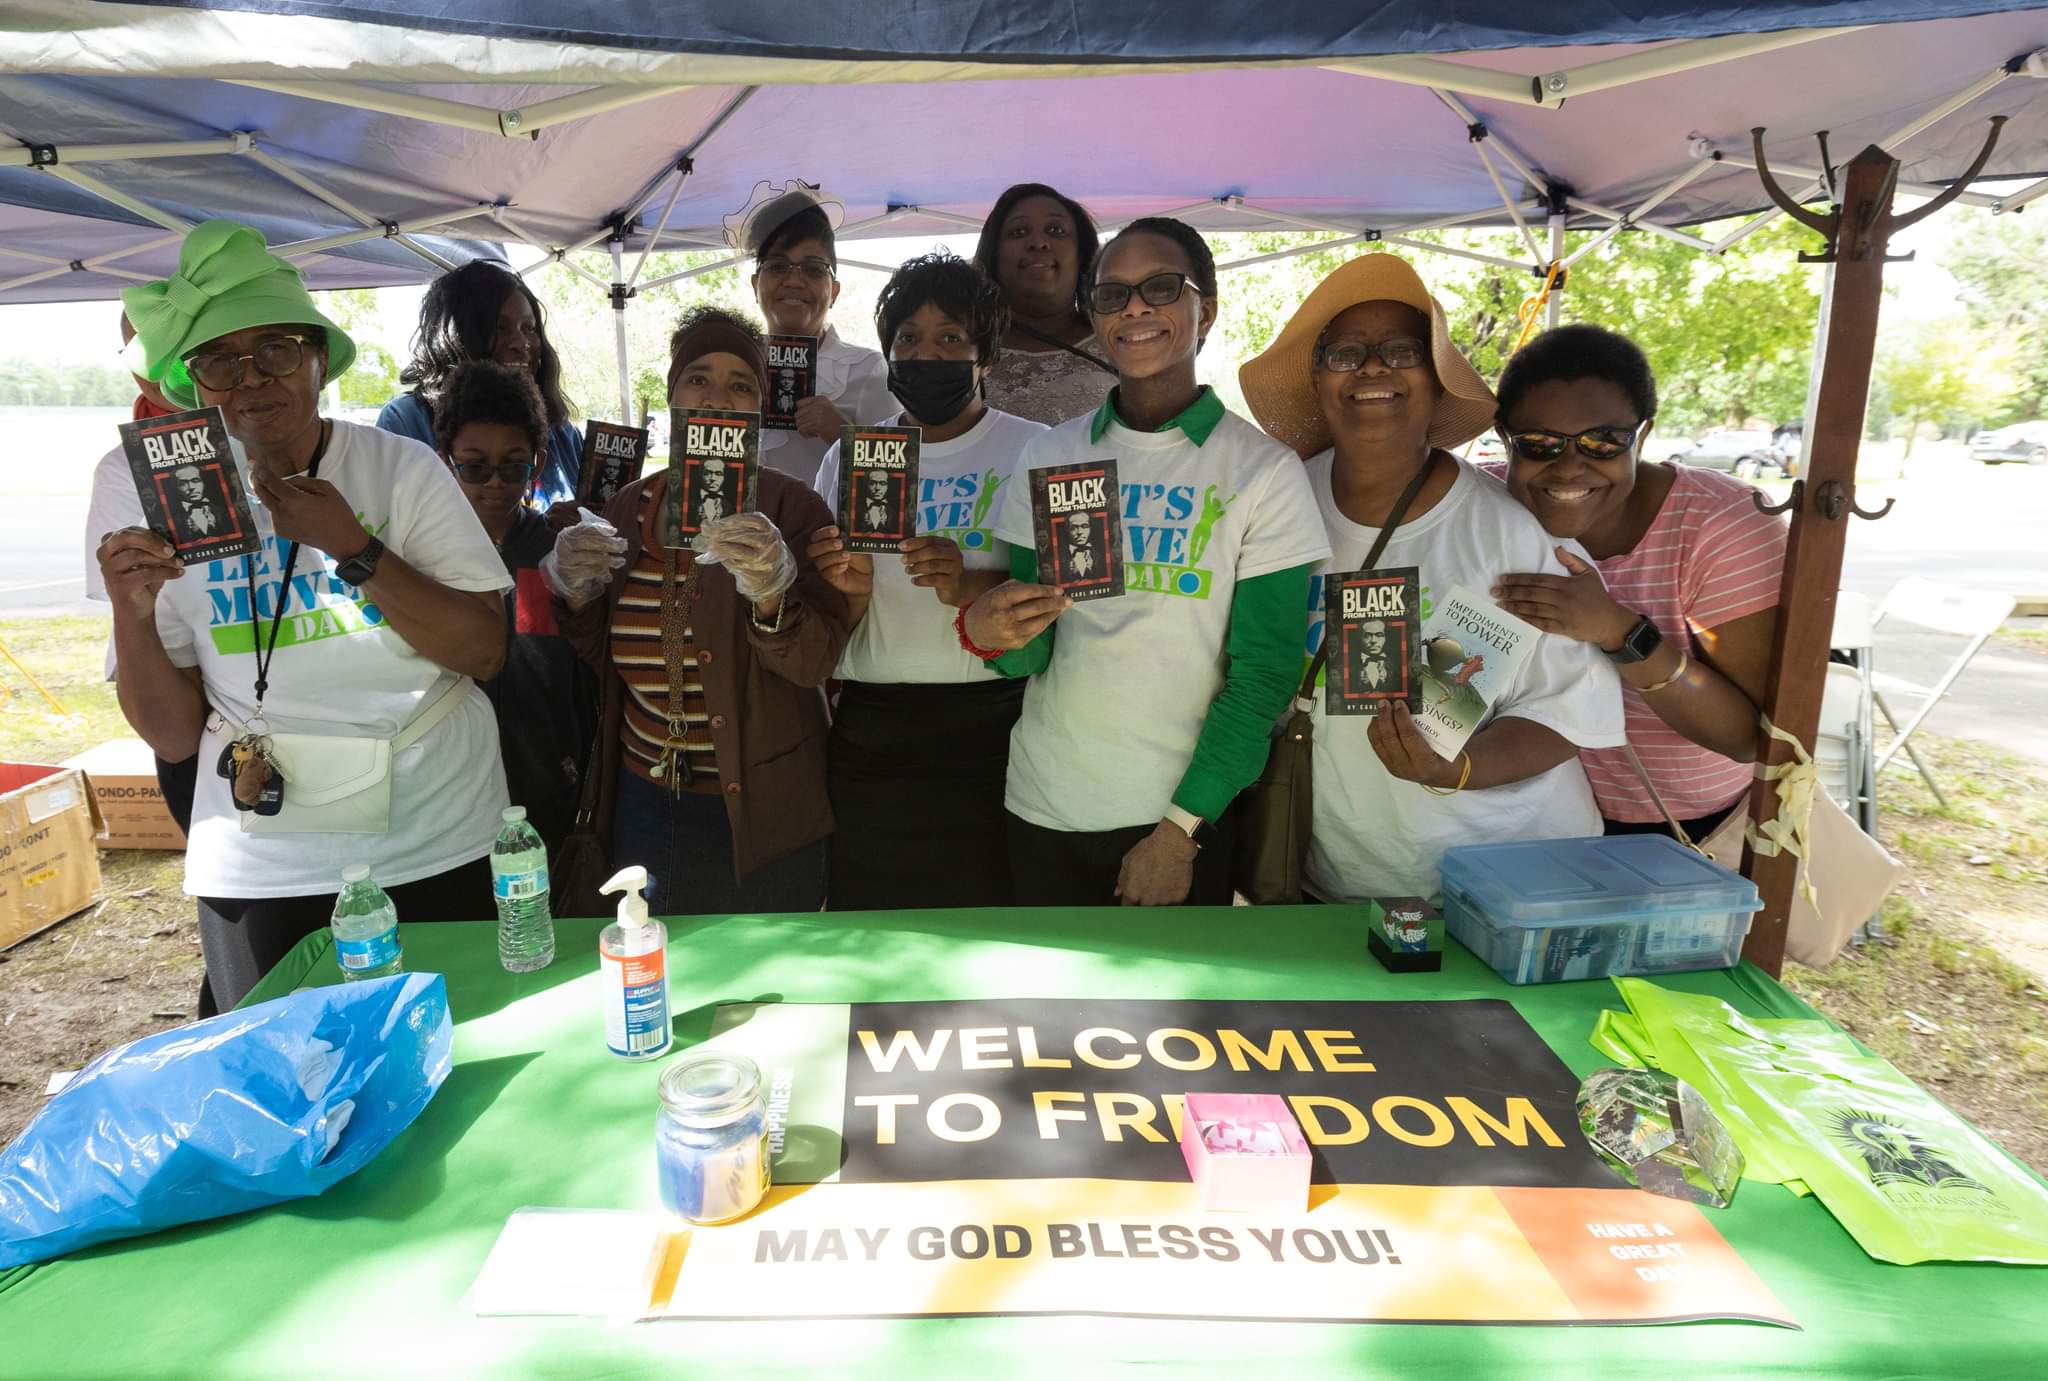 Willingboro church members pose with one of the books handed out at the Juneteenth festival